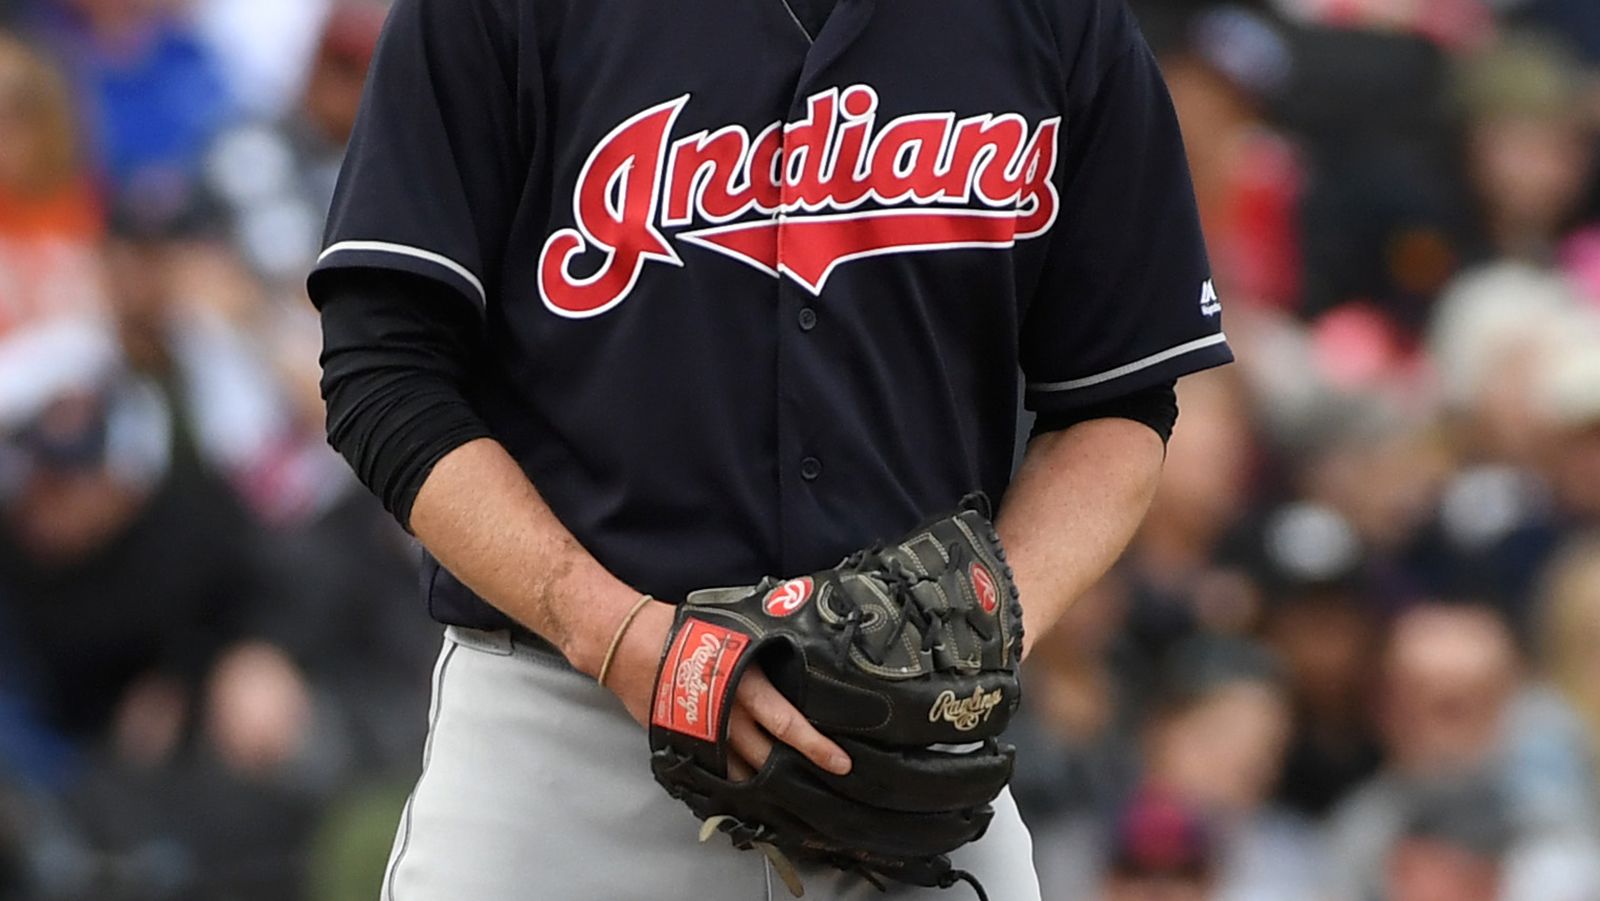 Cleveland Indians manager says it's time to change the team CNN